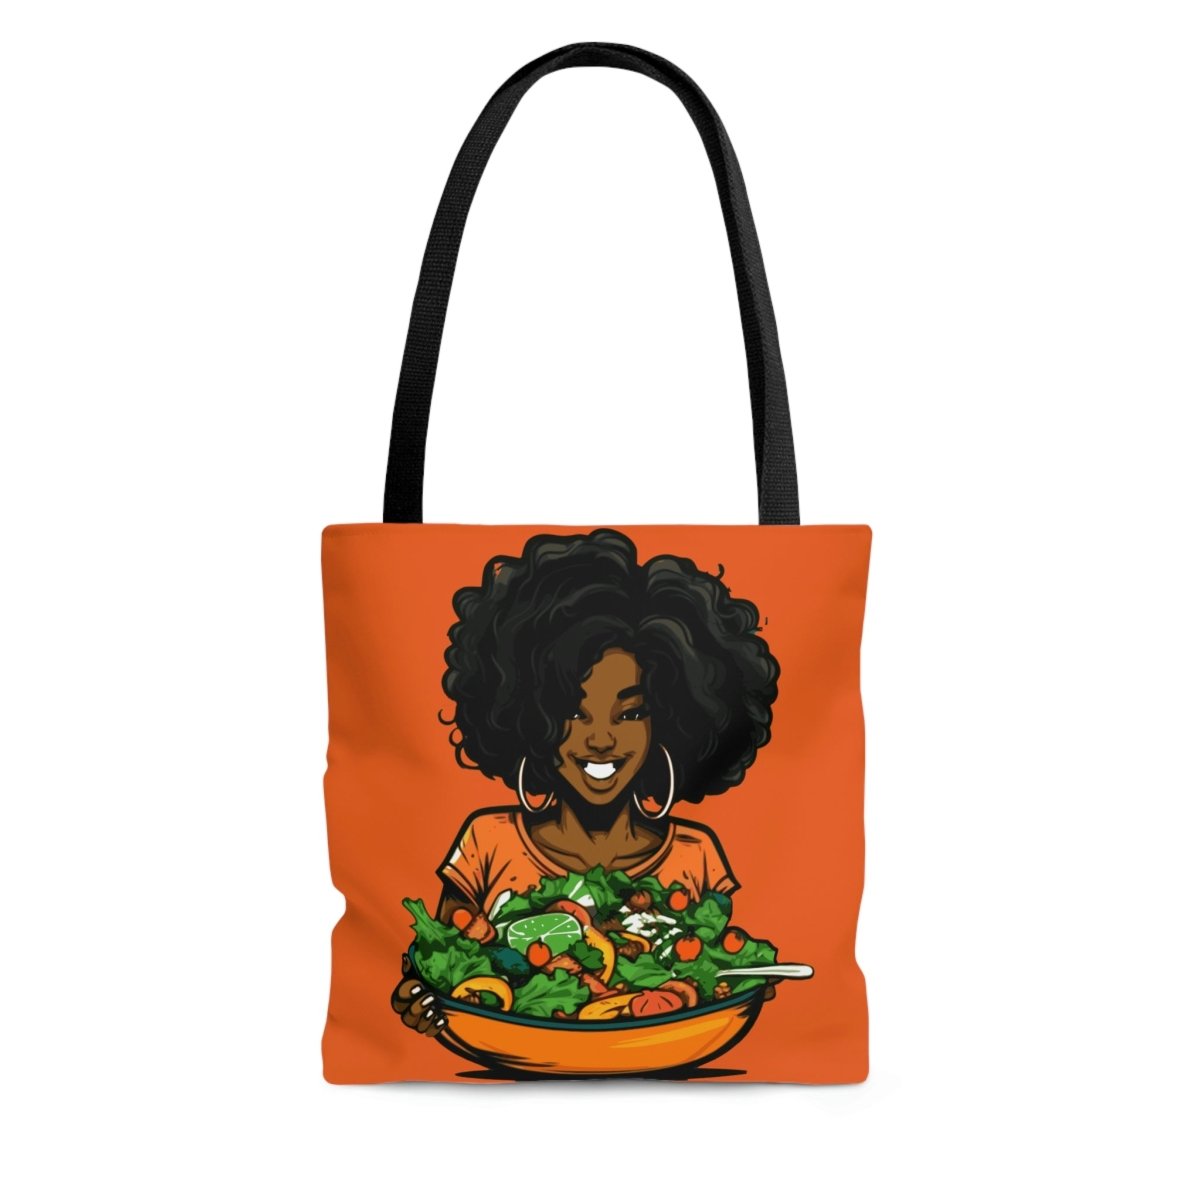 Afro Salad Tote Bag - The Trini Gee